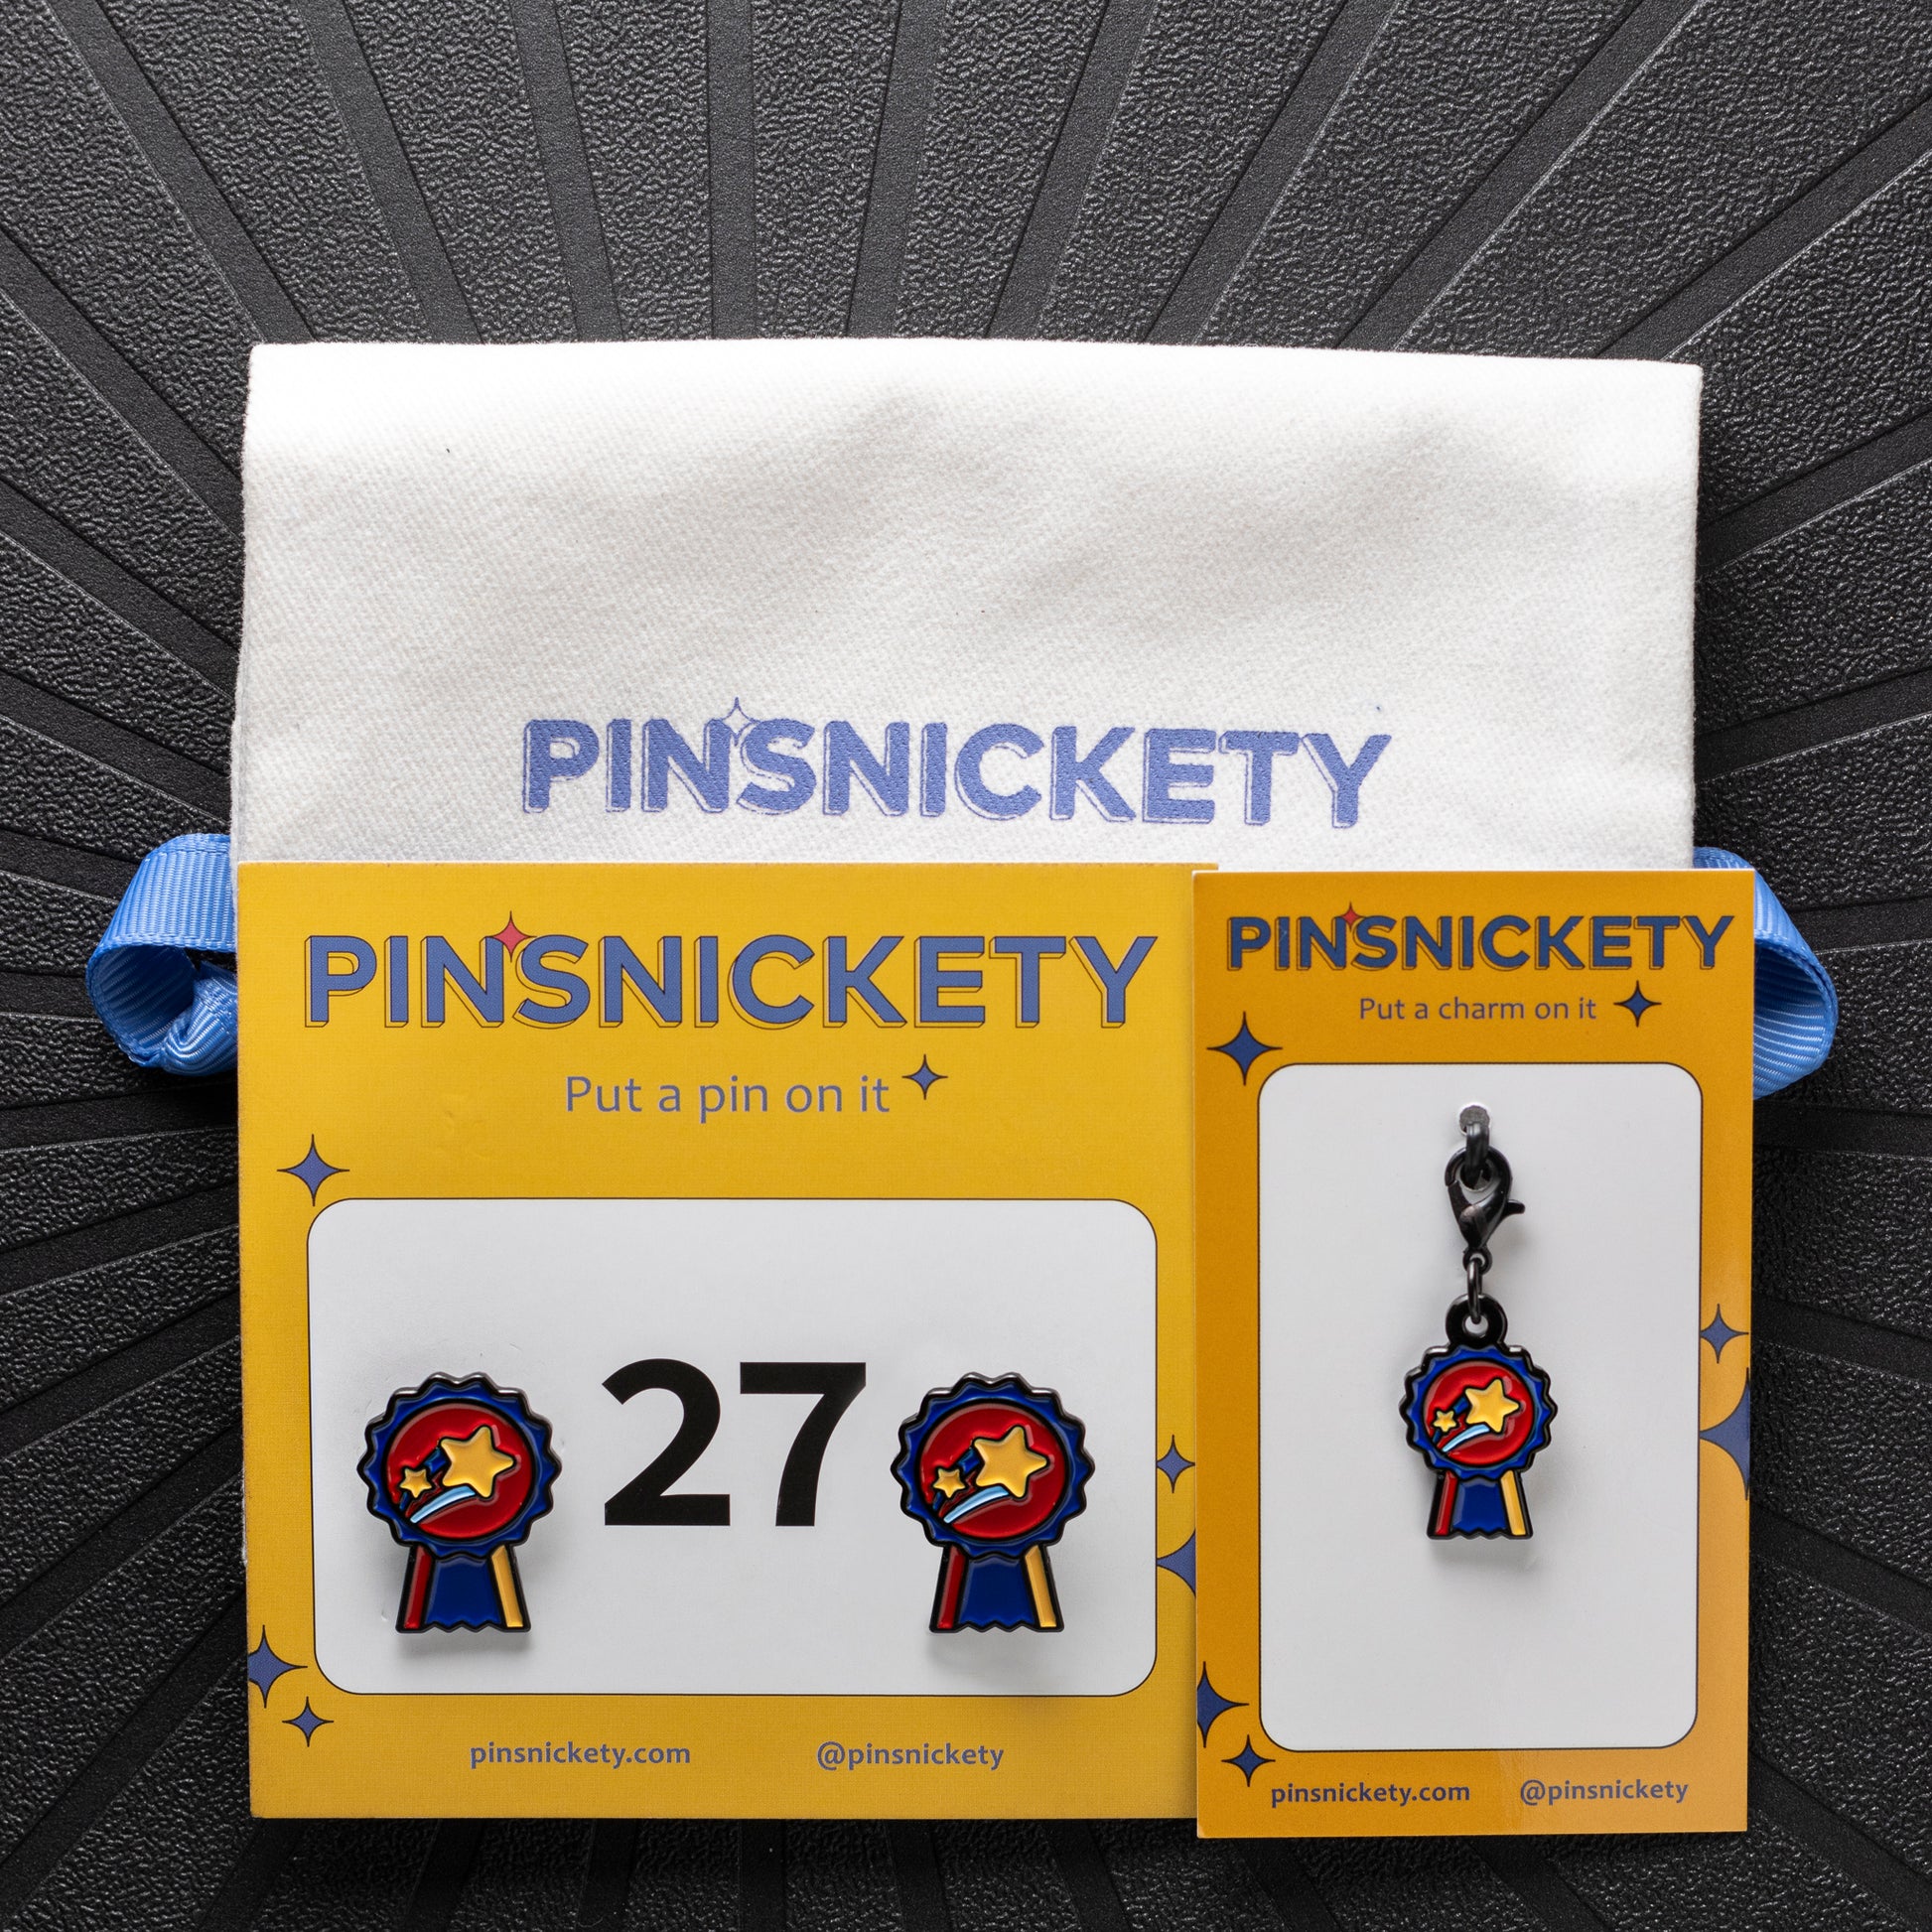 pinsnickety champion horse show number pins and braid and bridle charm set with a twill storage bag on a black background